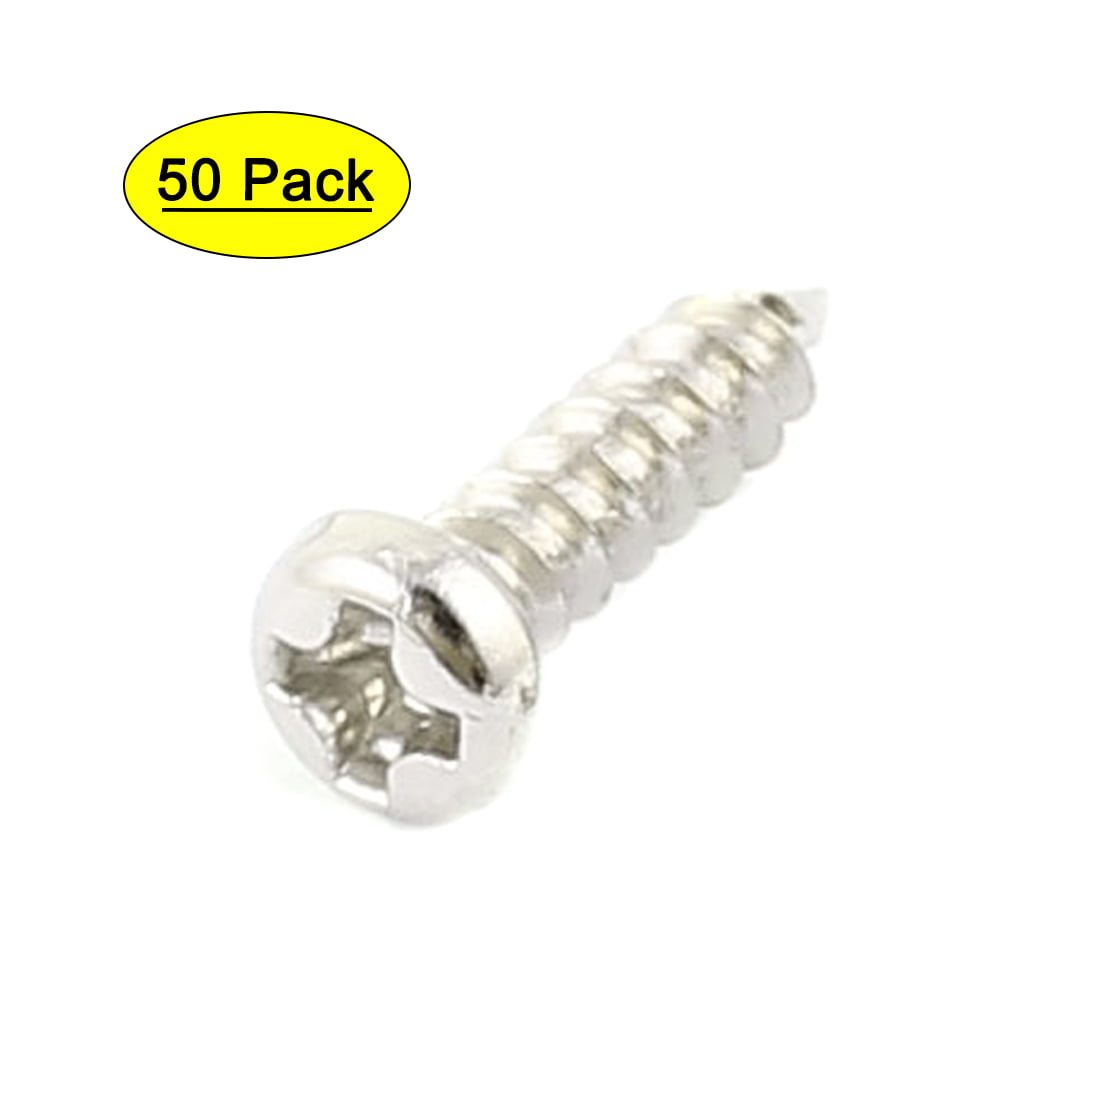 10g x 1/2" Pan Phillips Self Tapping Screw 304 Stainless Steel Self Tapper 